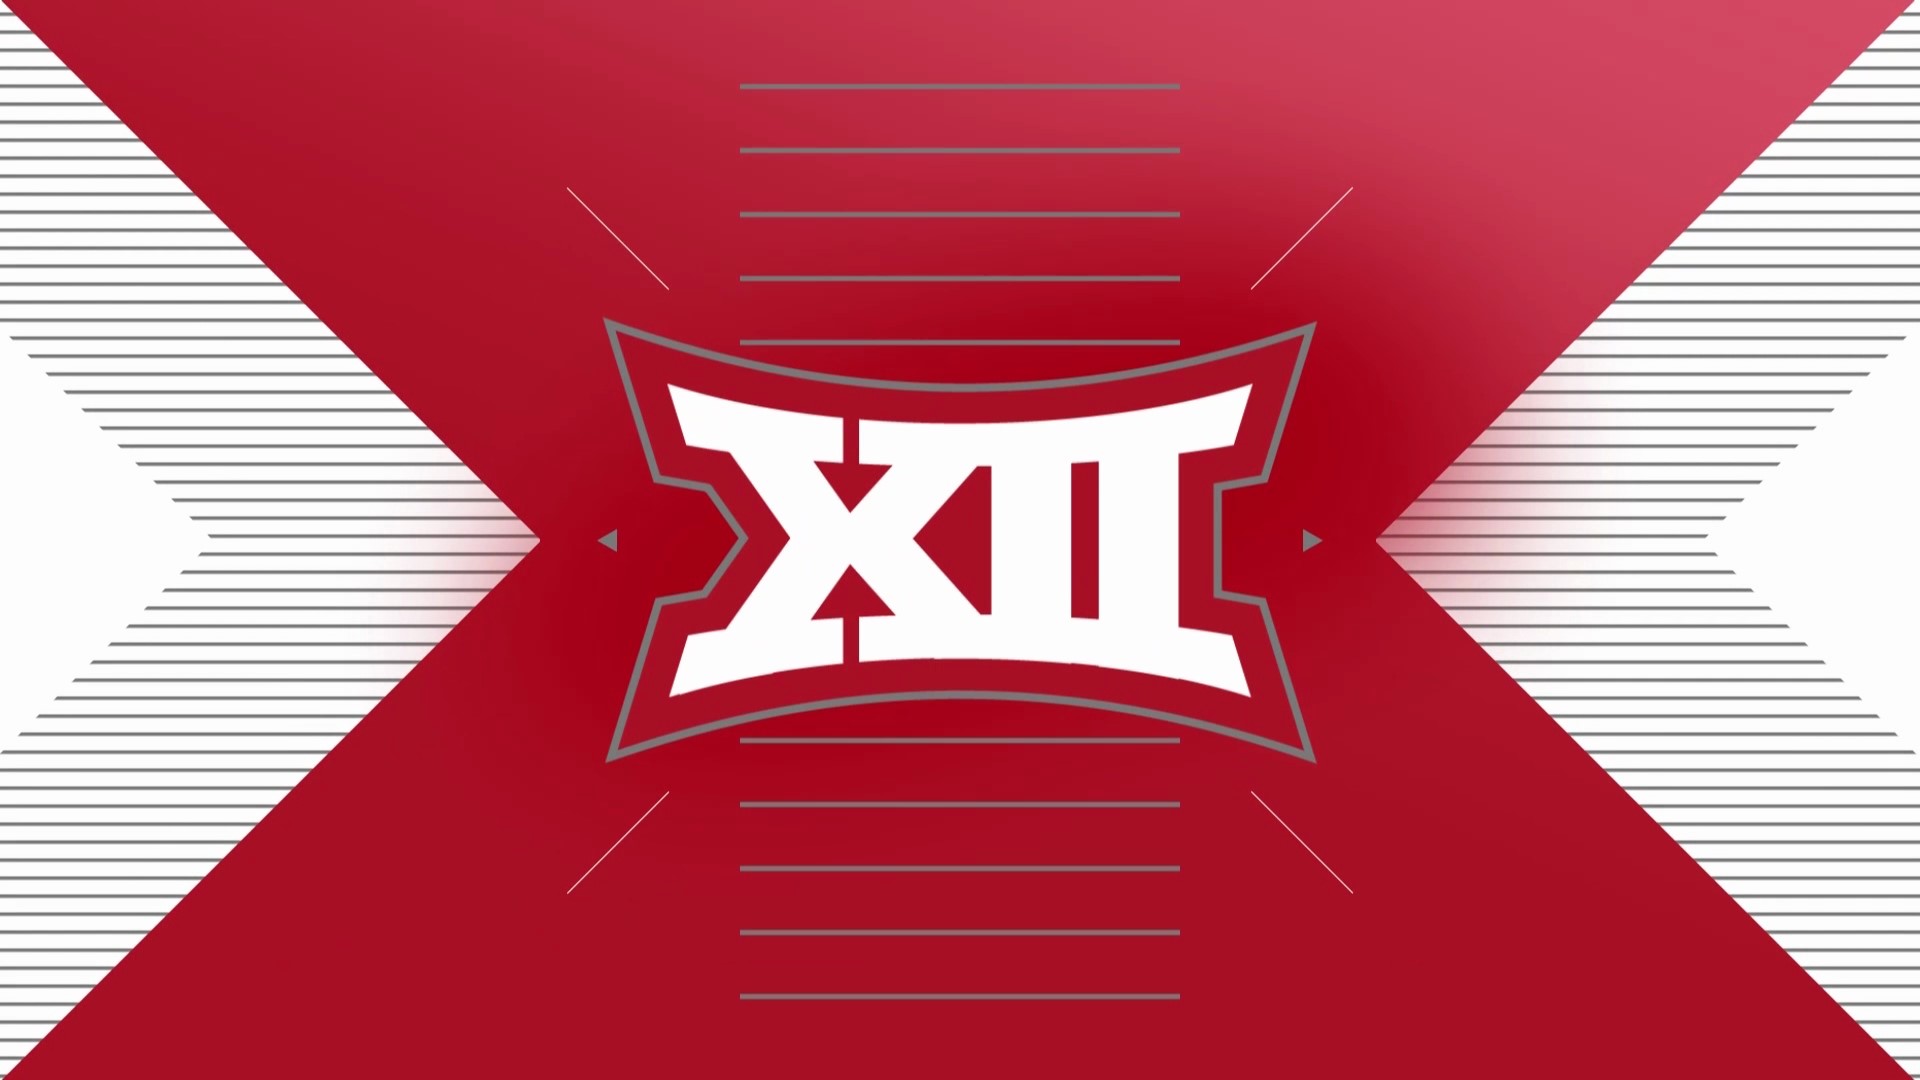 6 News Sports Director Kurtis Quillin and John Morris preview Baylor vs. Iowa State and other Big 12 matchups.